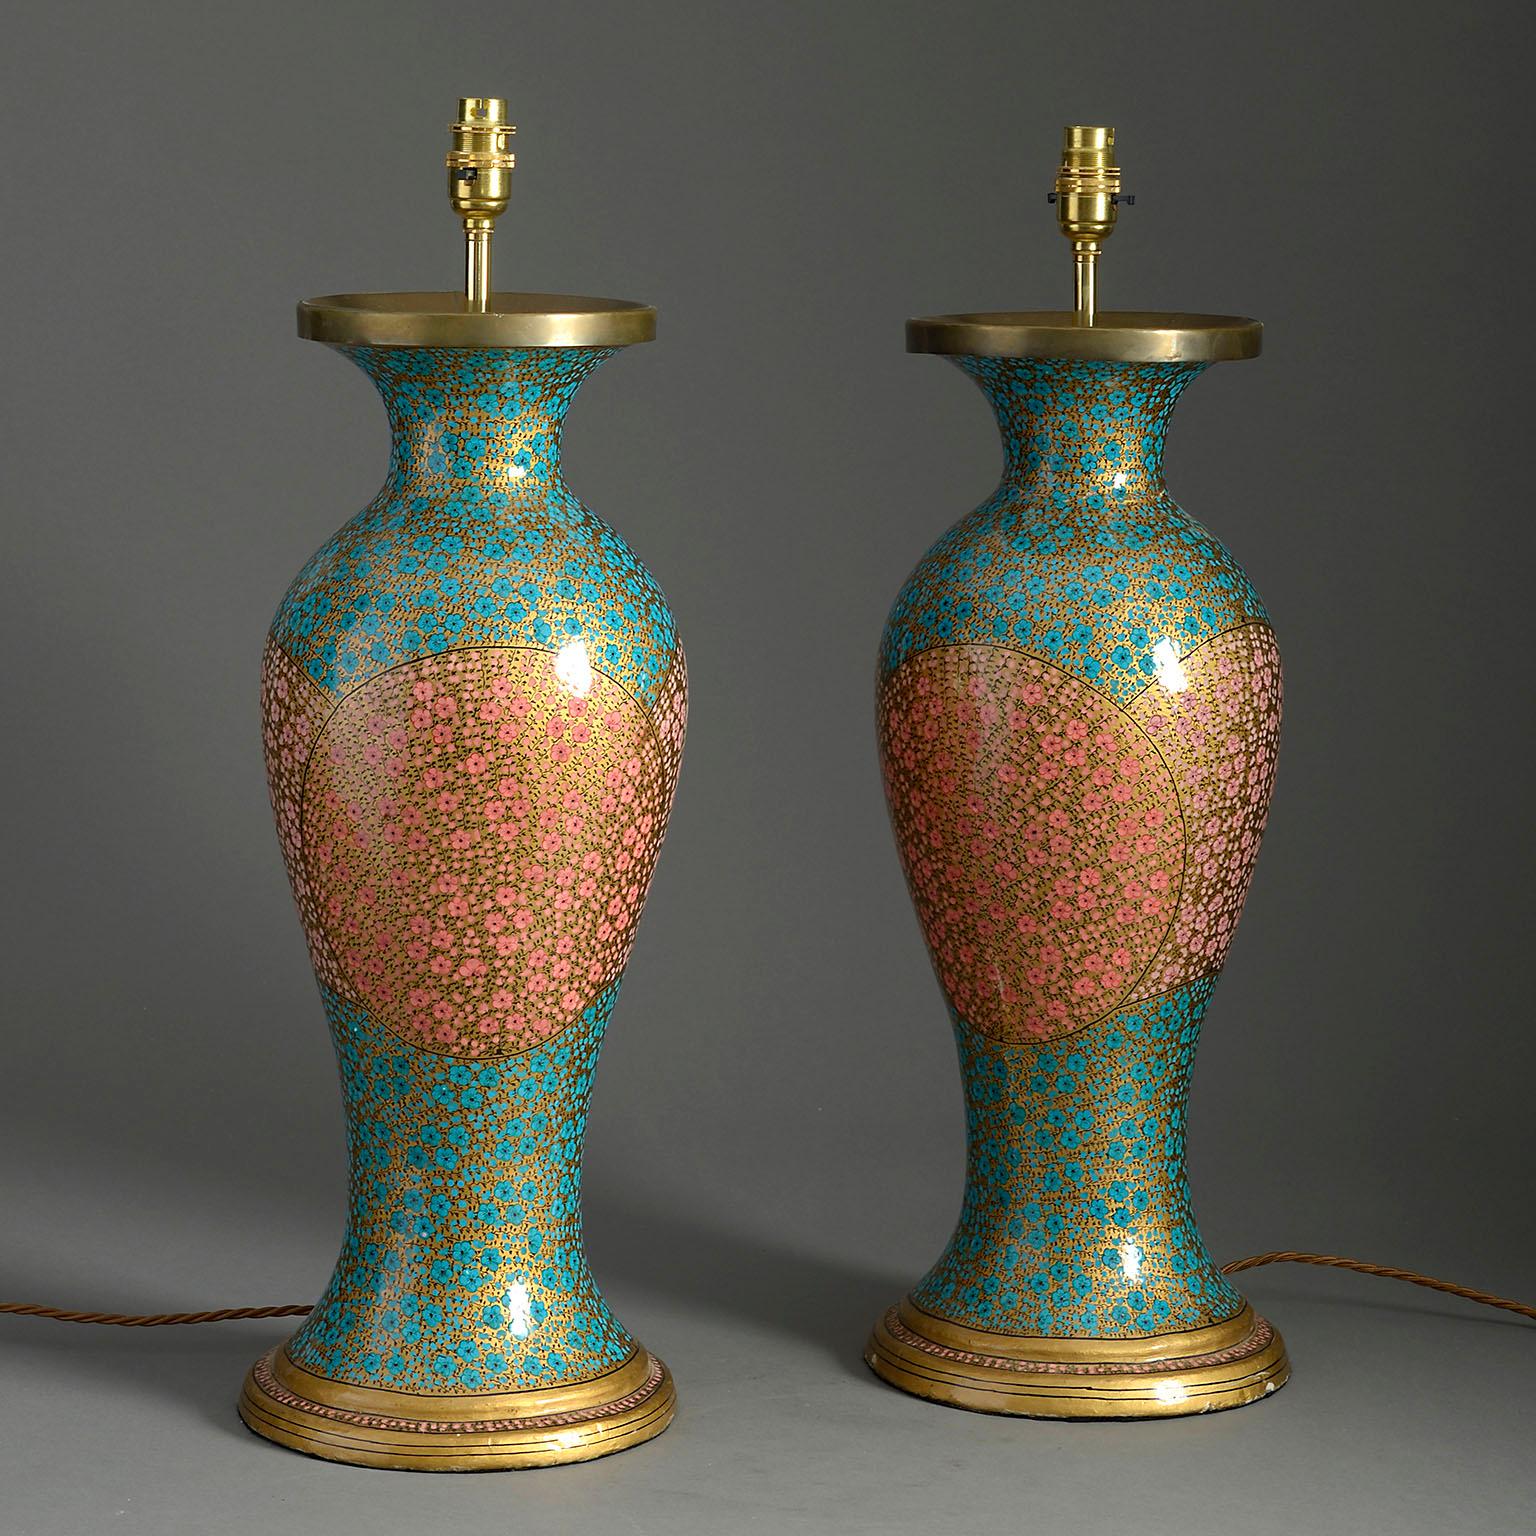 A pair of early 20th century Kashmiri lacquer table lamps of baluster form, decorated with gilded blossoms upon turquoise and pink grounds with gilded bases.

Wired to UK standards. These lamps can be re-wired to all international